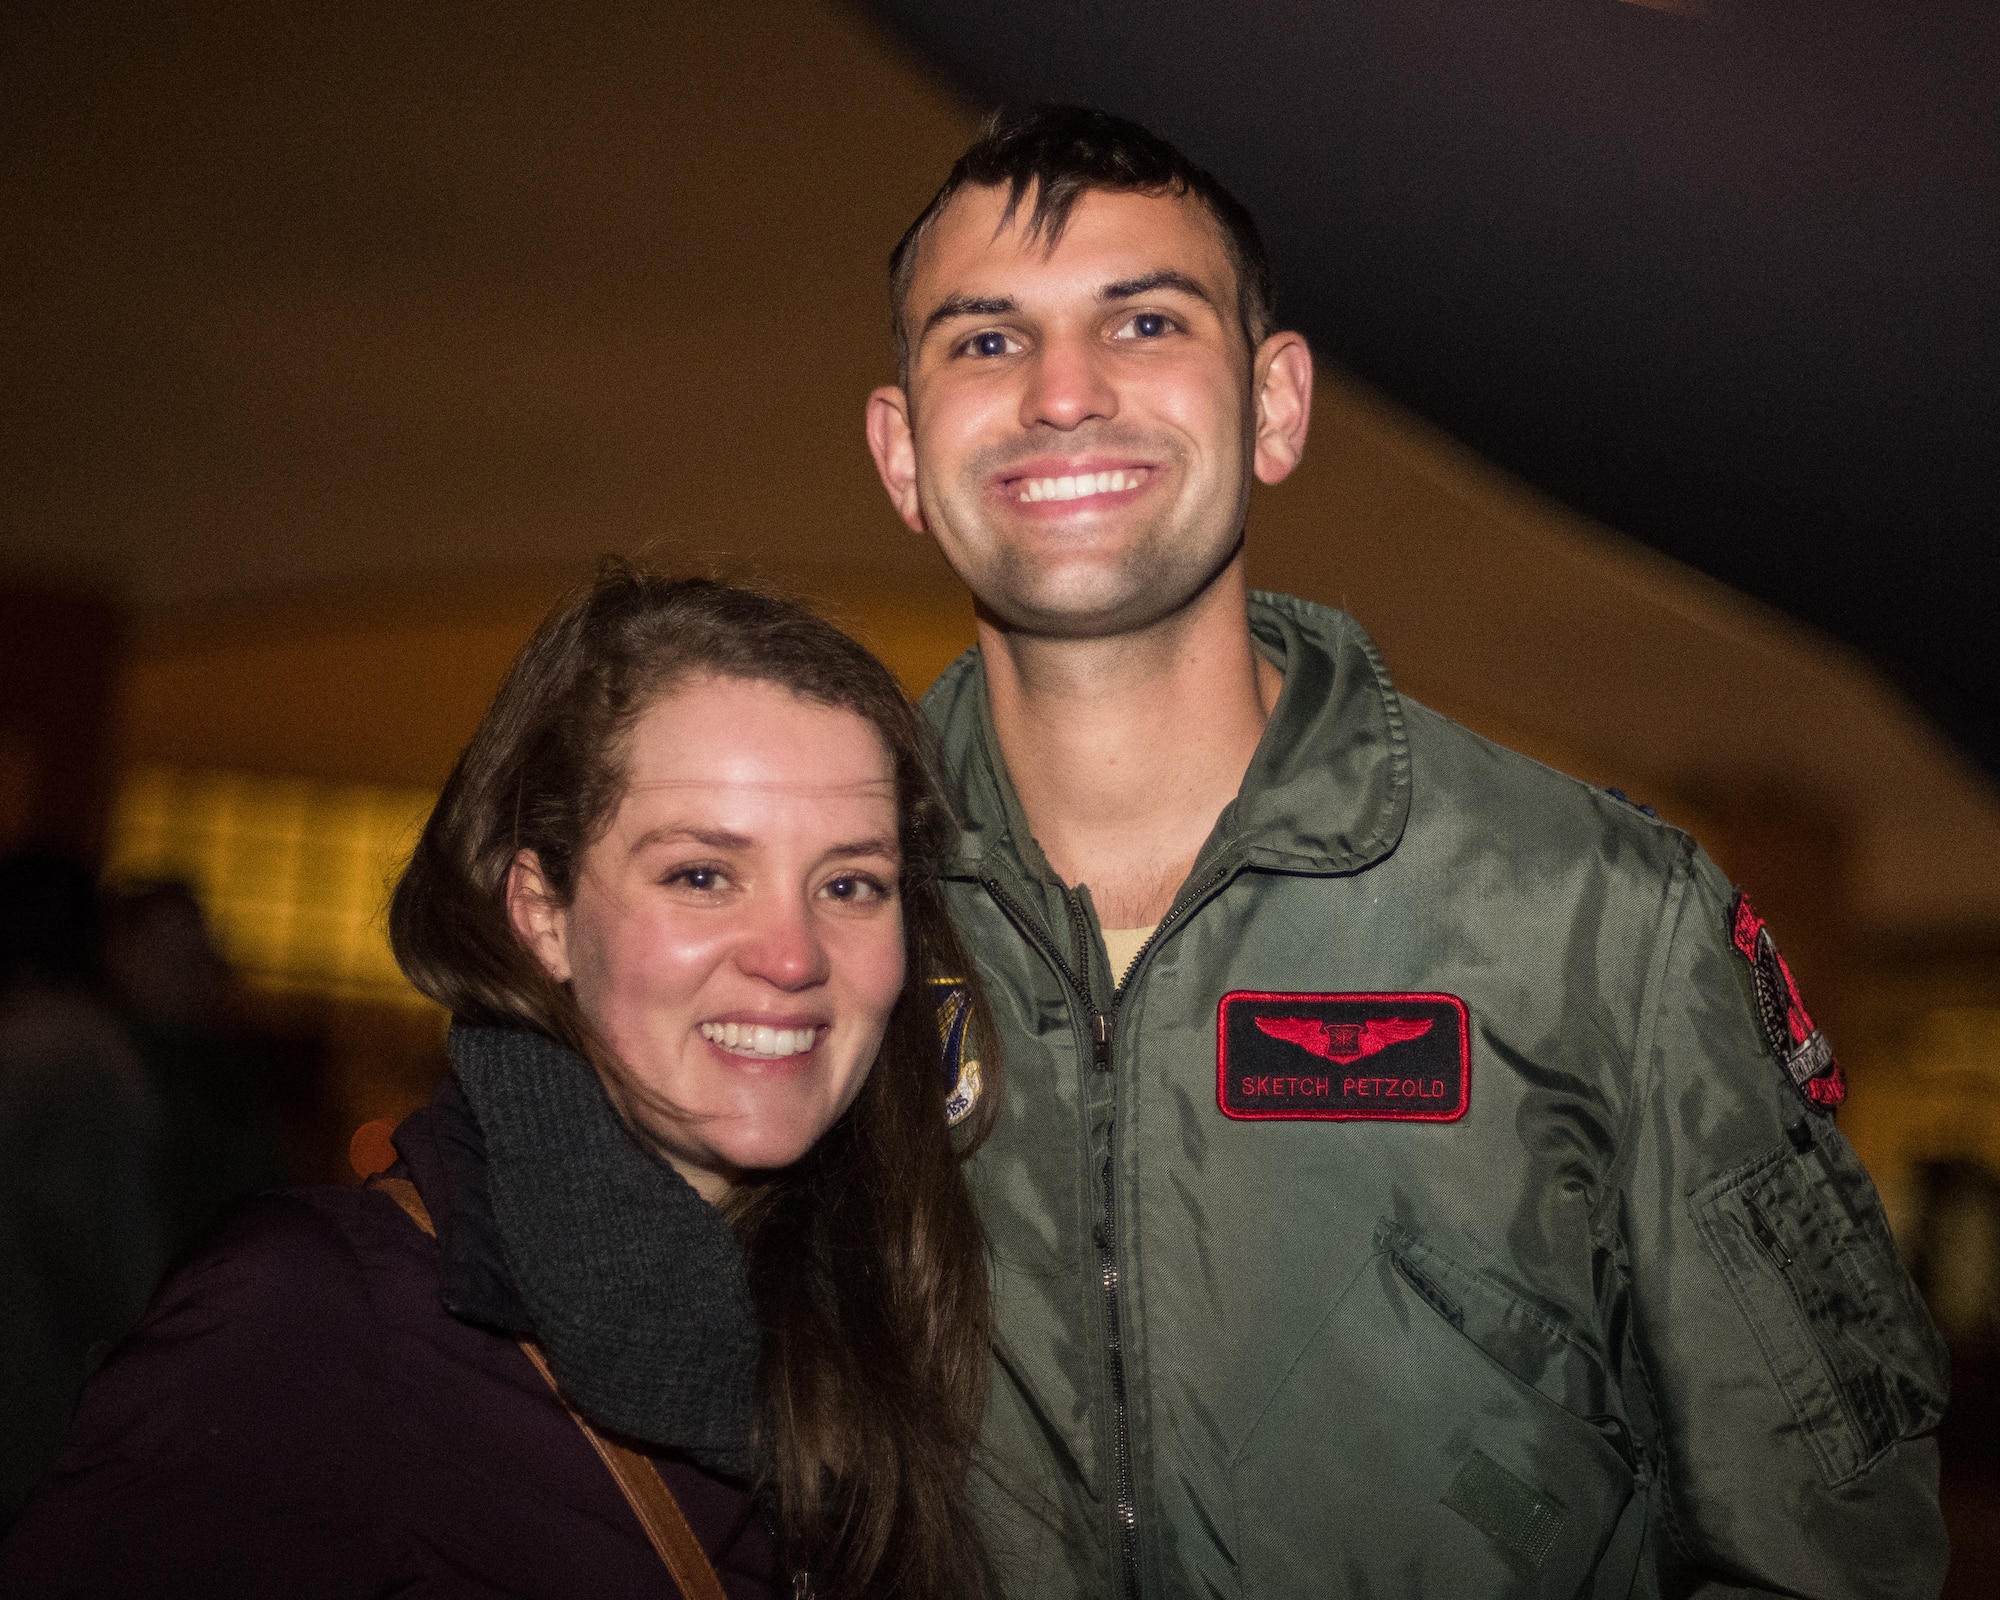 After returning from a deployment, Capt. Zach Petzold, 96th Bomb Squadron electronic warfare officer, and his wife pose for a photo at Barksdale Air Force Base, La., Jan. 16, 2019. Petzold and his team deployed to Andersen Air Force Base, Guam for six months in support of Continuous Bomber Presence. (U.S. Air Force photo by Airman 1st Class Lillian Miller)